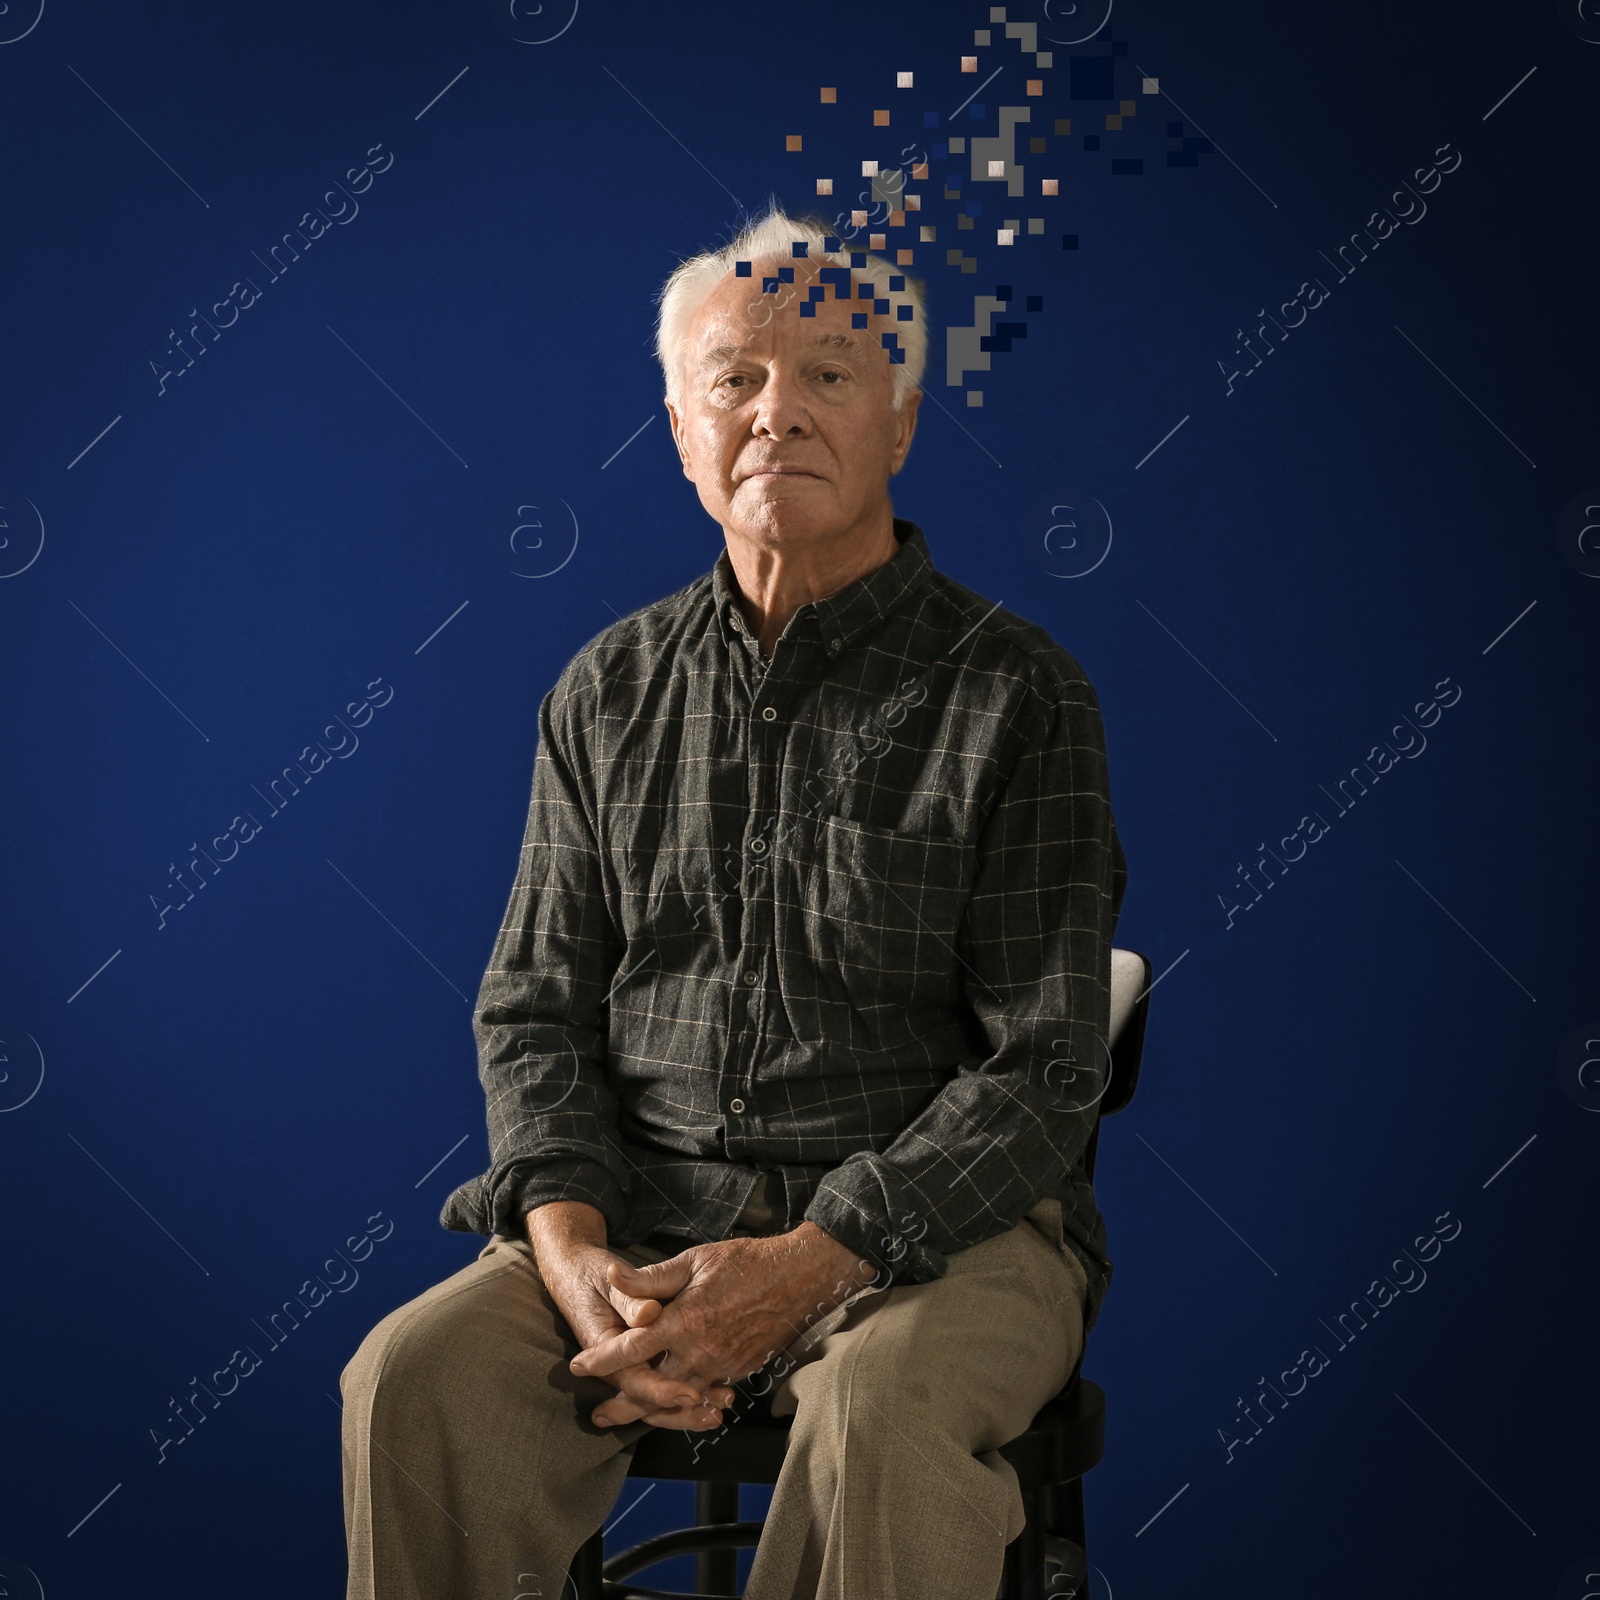 Image of Elderly man with dementia on blue background. Illustration of head losing fragments